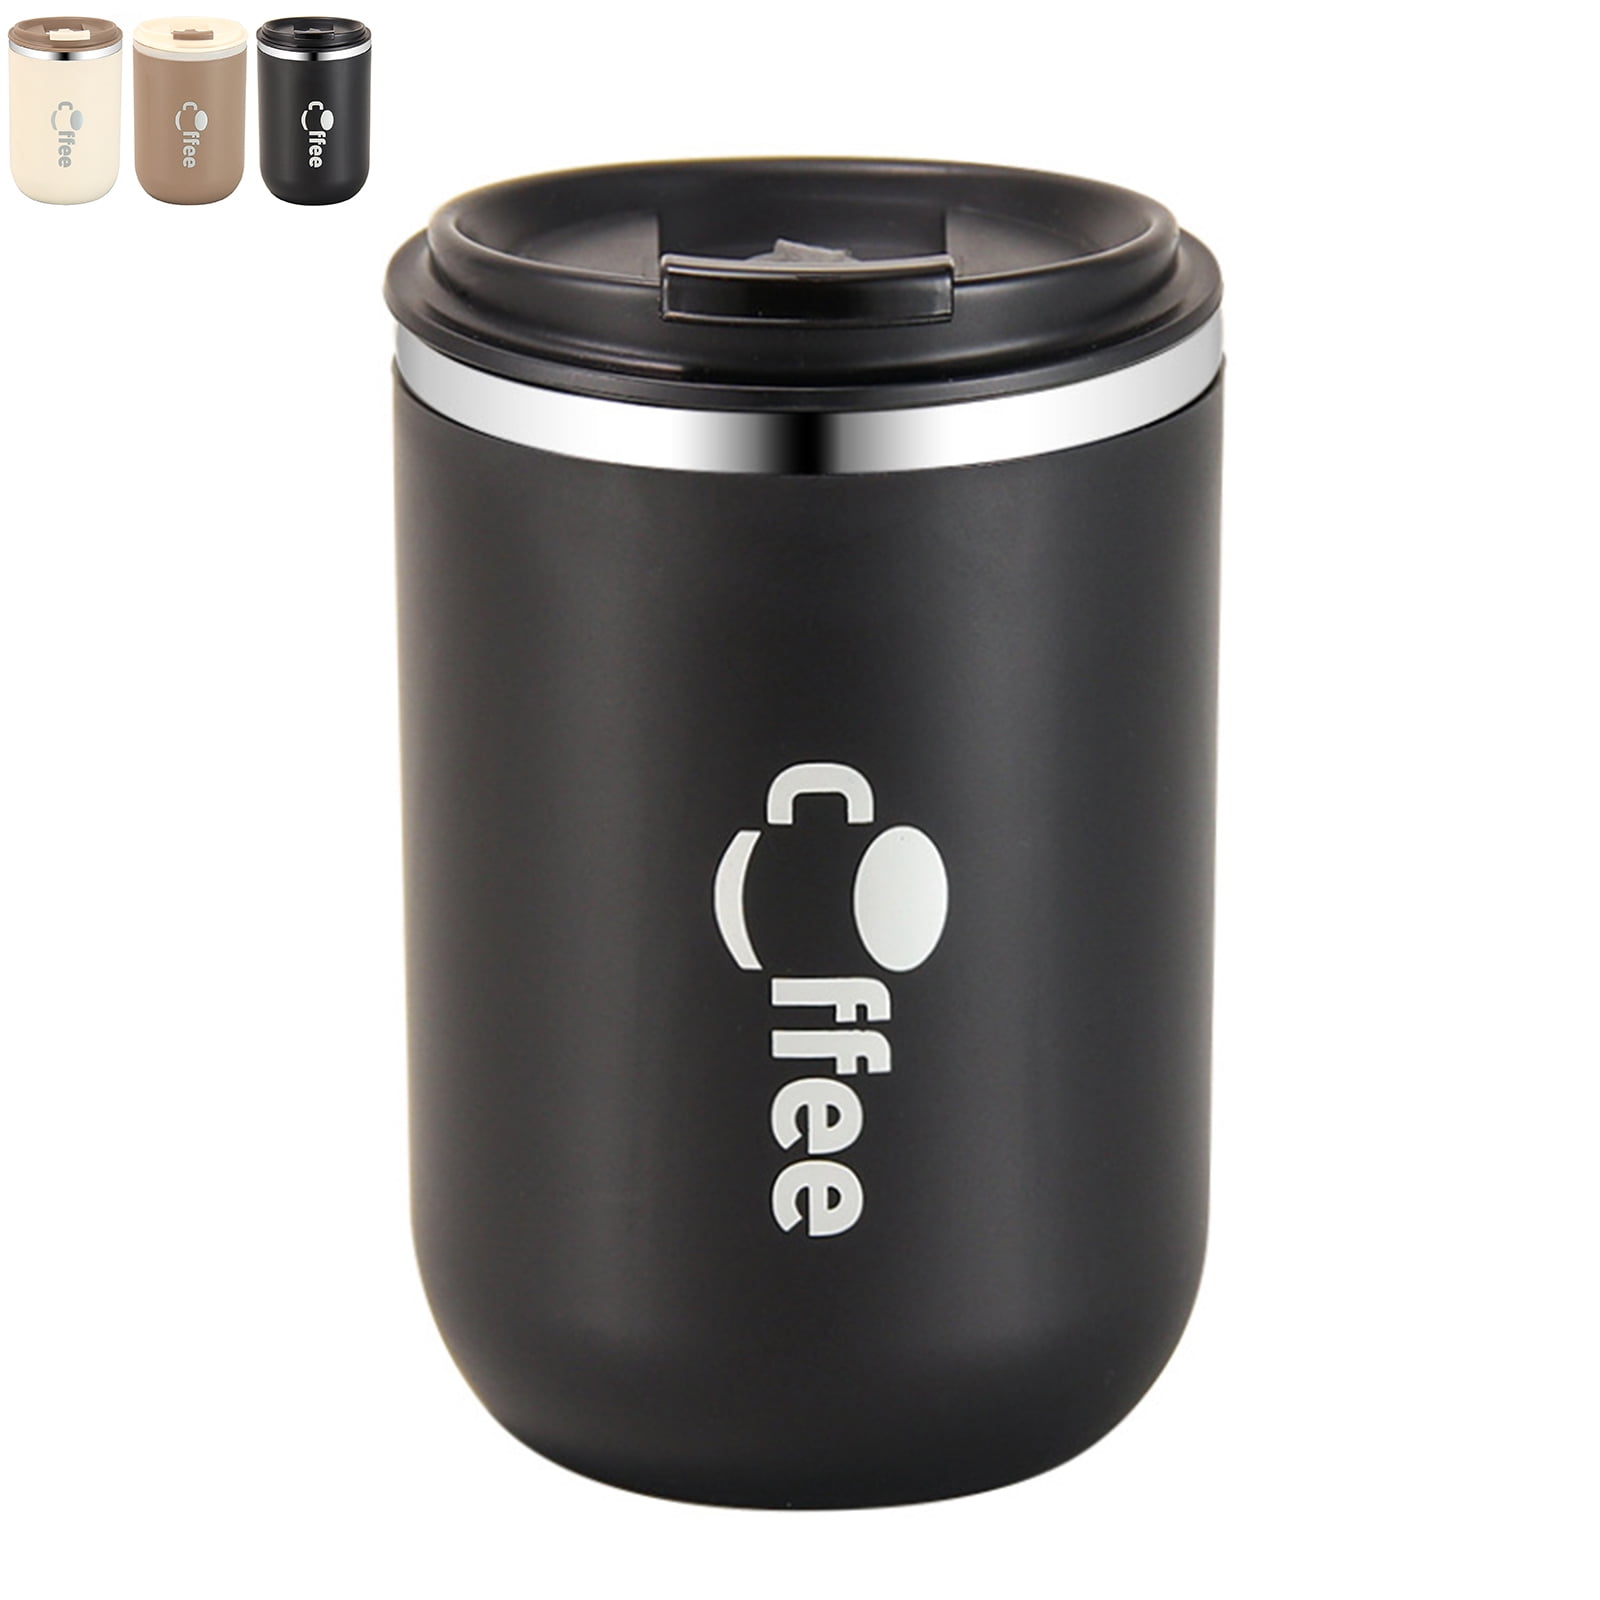 Ideus 16 oz Insulated Coffee Mug with Handle and Lid, Double Wall Stainless  Steel Vacuum Insulated Tumbler Cup, Travel Coffee Cup Thermal Cup for Home  and Offic…